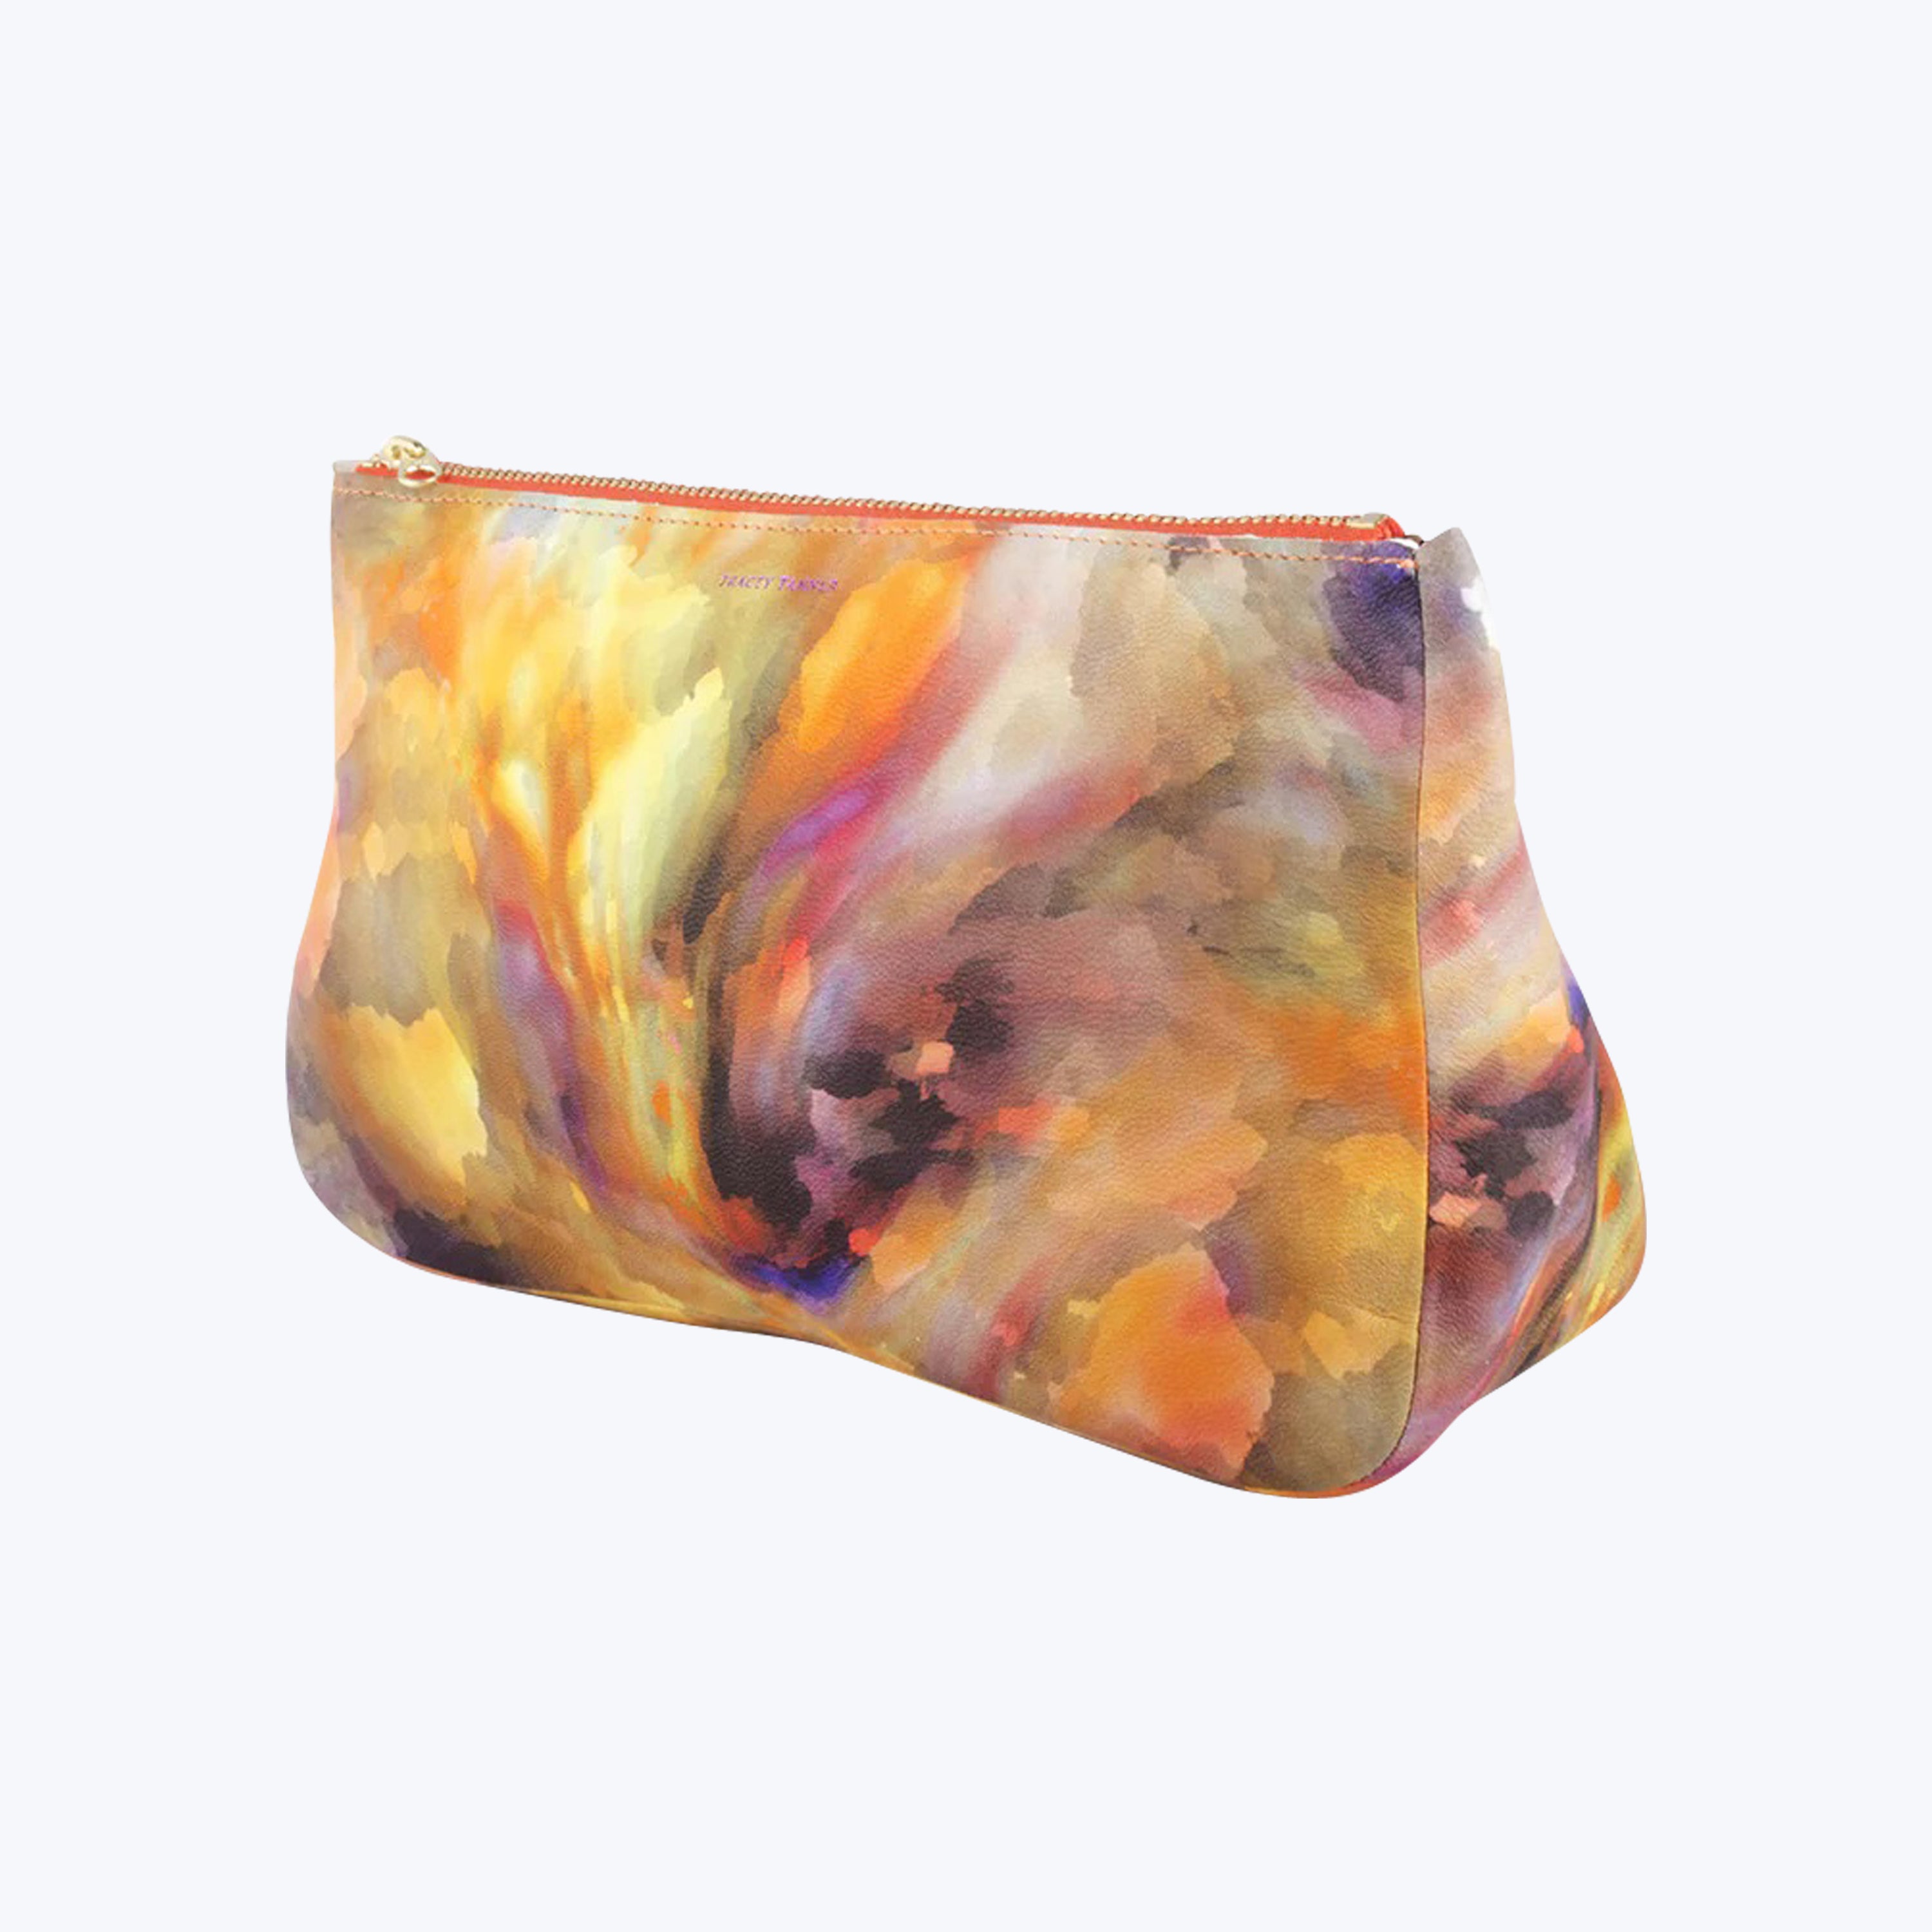 Watercolor Fatty Pouch Large / Day